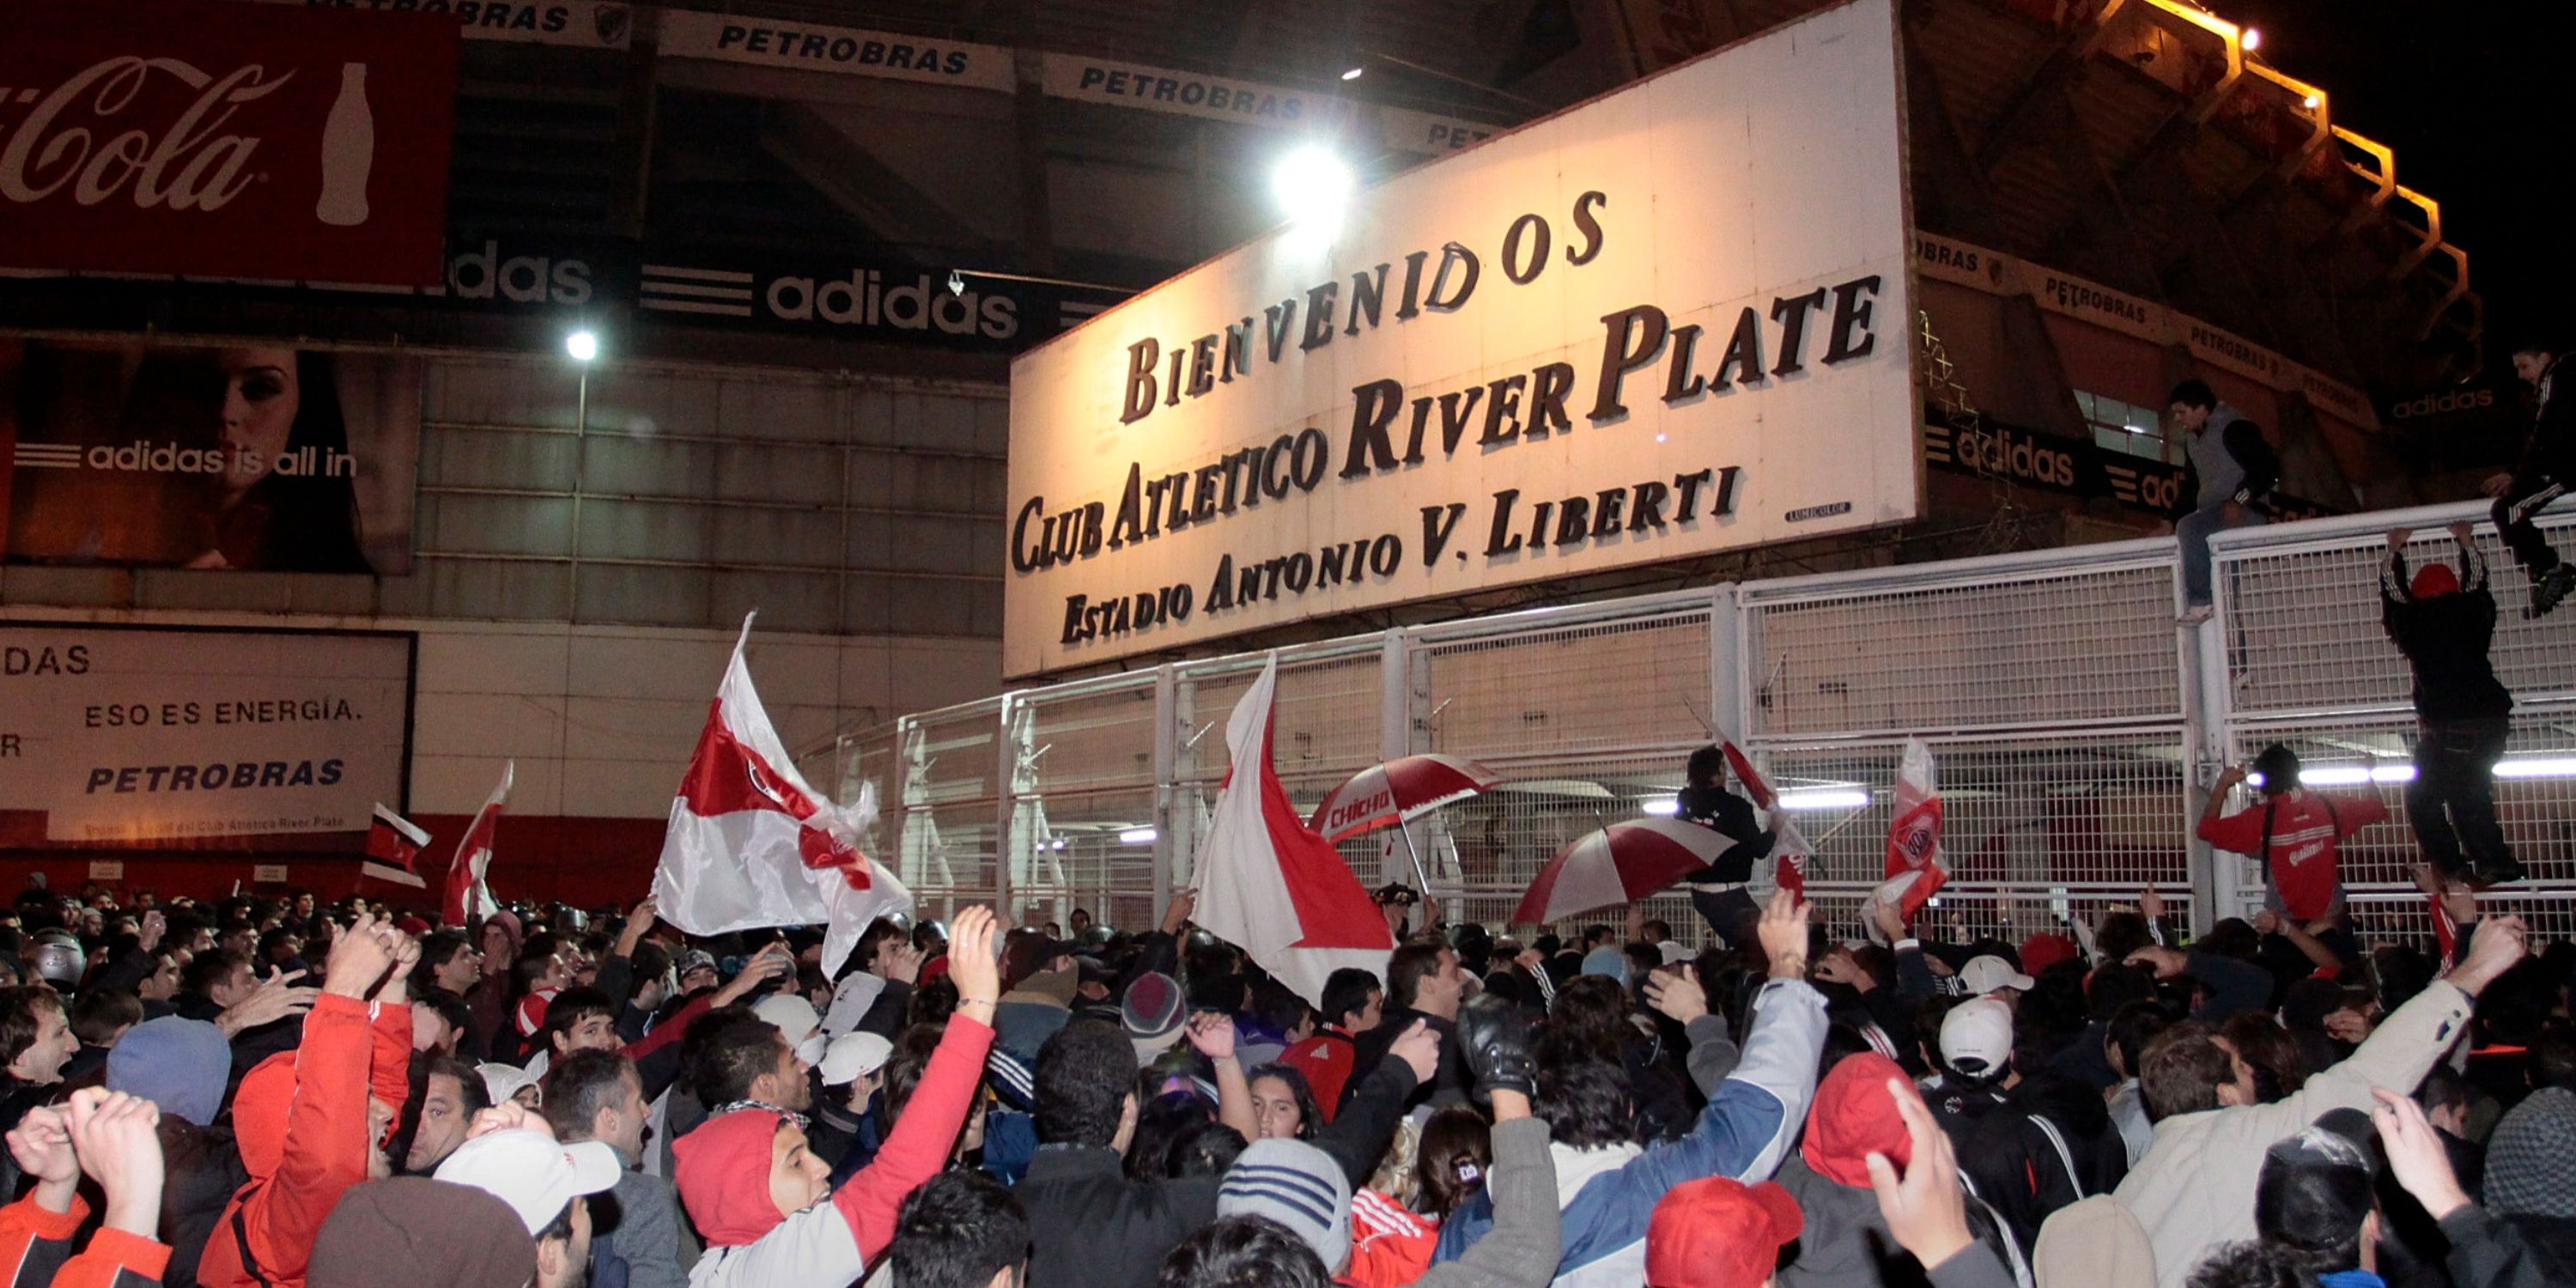 Fans of Argentine River Plate soccer club try to storm into El Monumental stadium after relegation